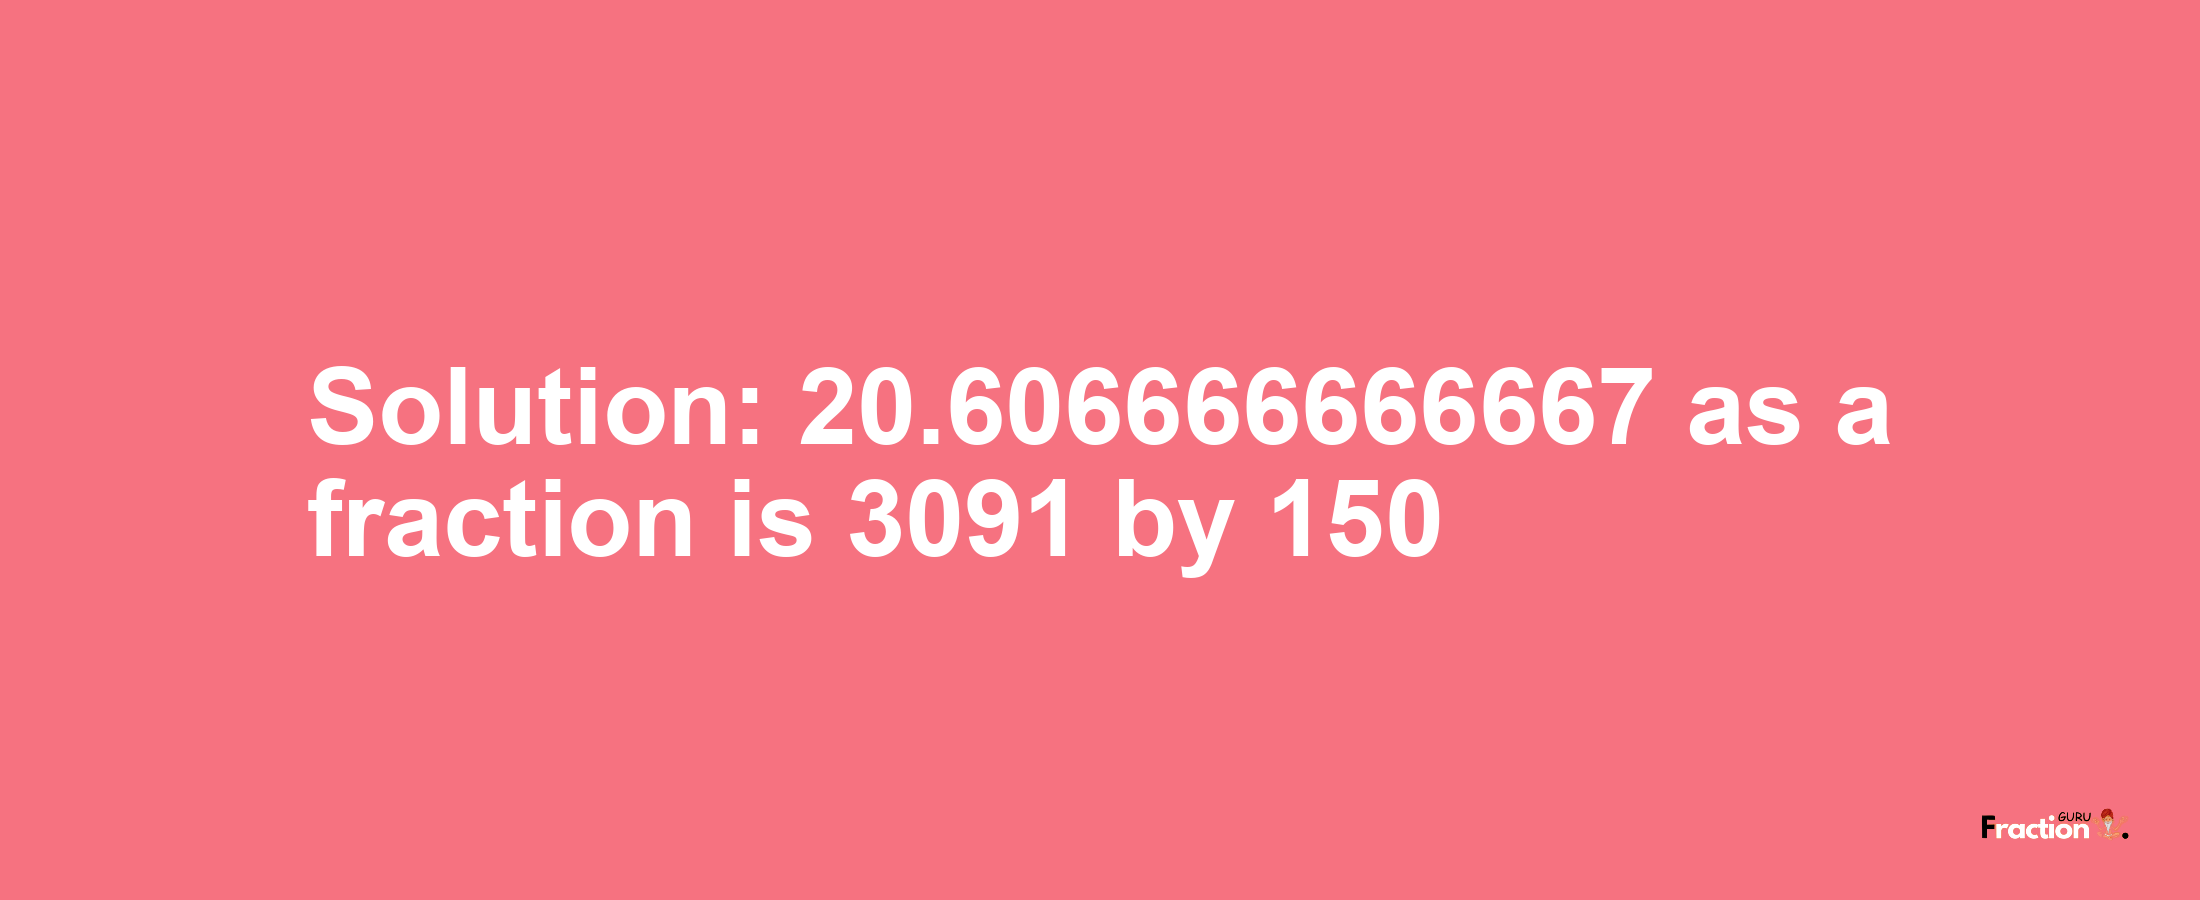 Solution:20.606666666667 as a fraction is 3091/150